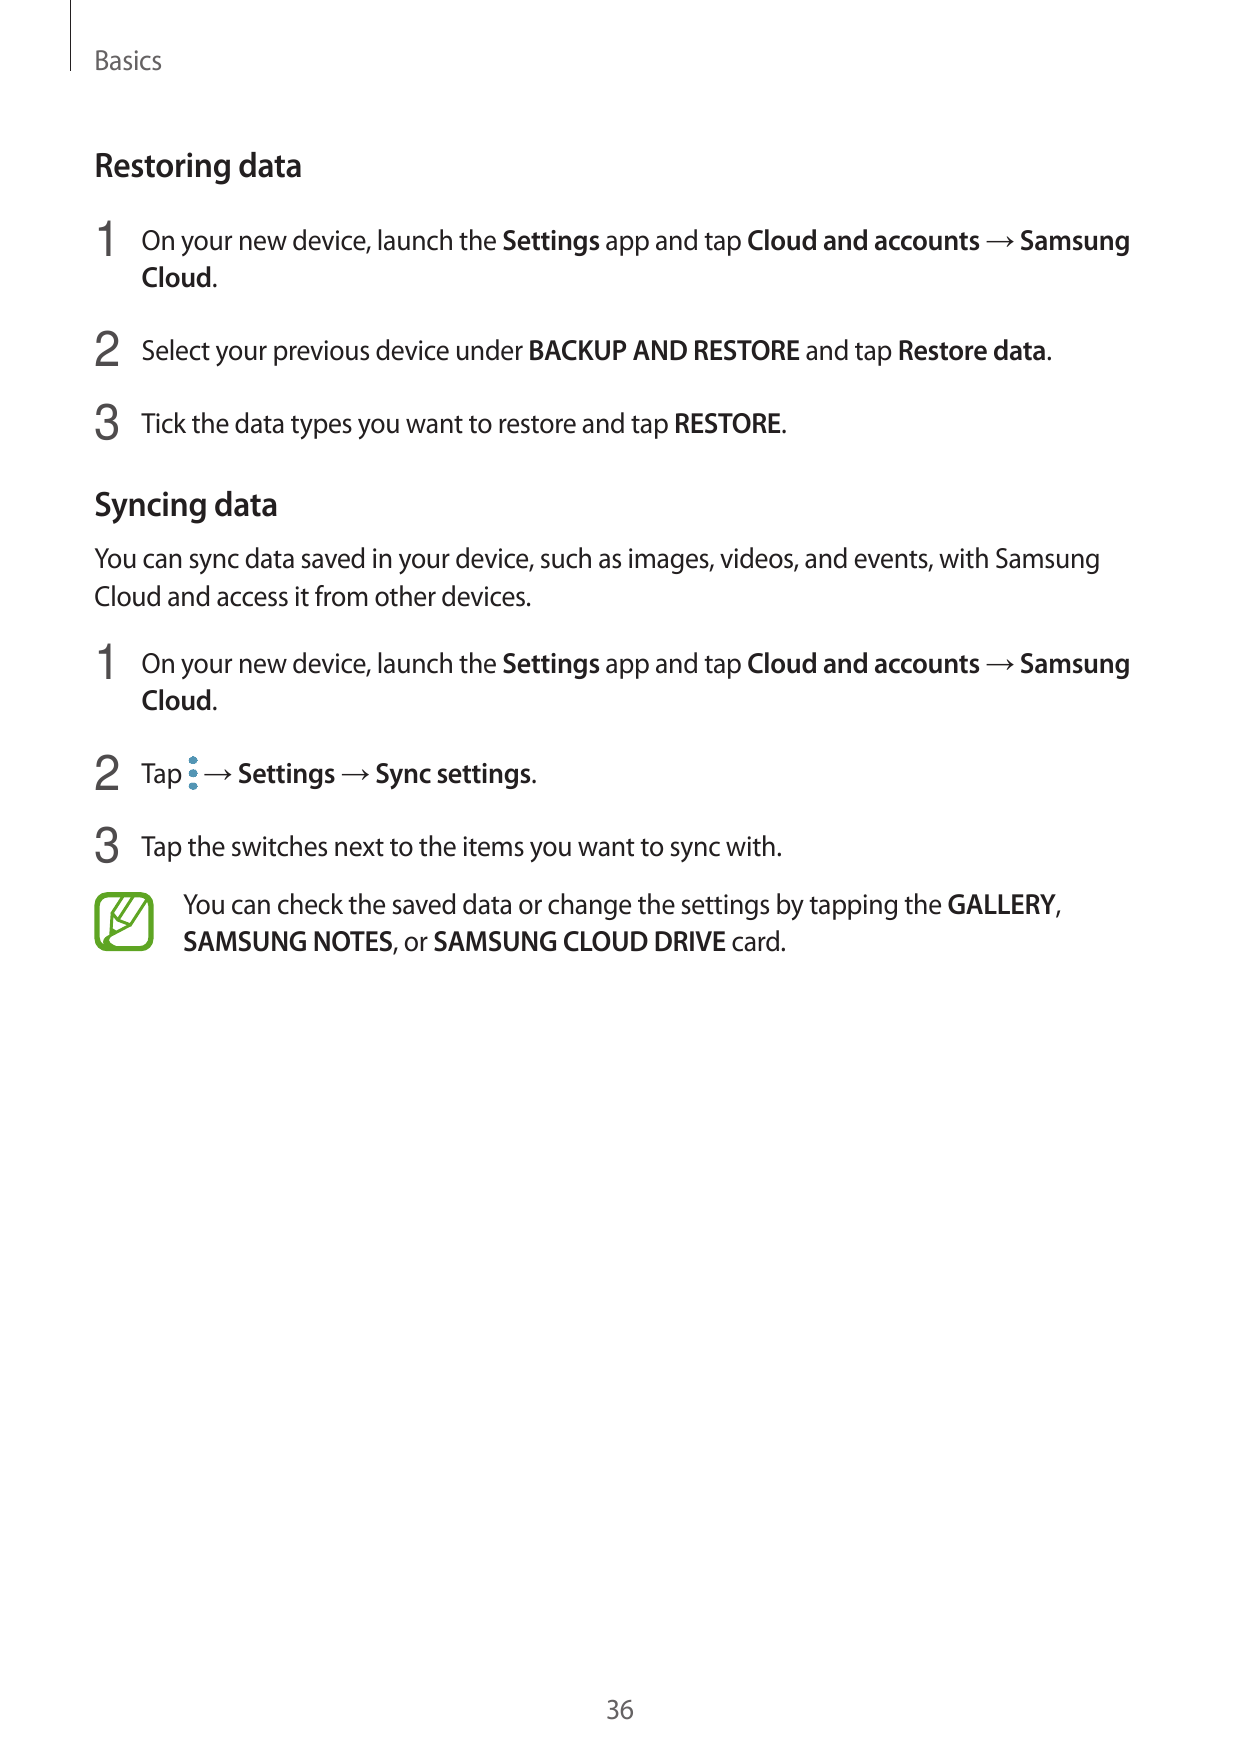 BasicsRestoring data1 On your new device, launch the Settings app and tap Cloud and accounts → SamsungCloud.2 Select your previo